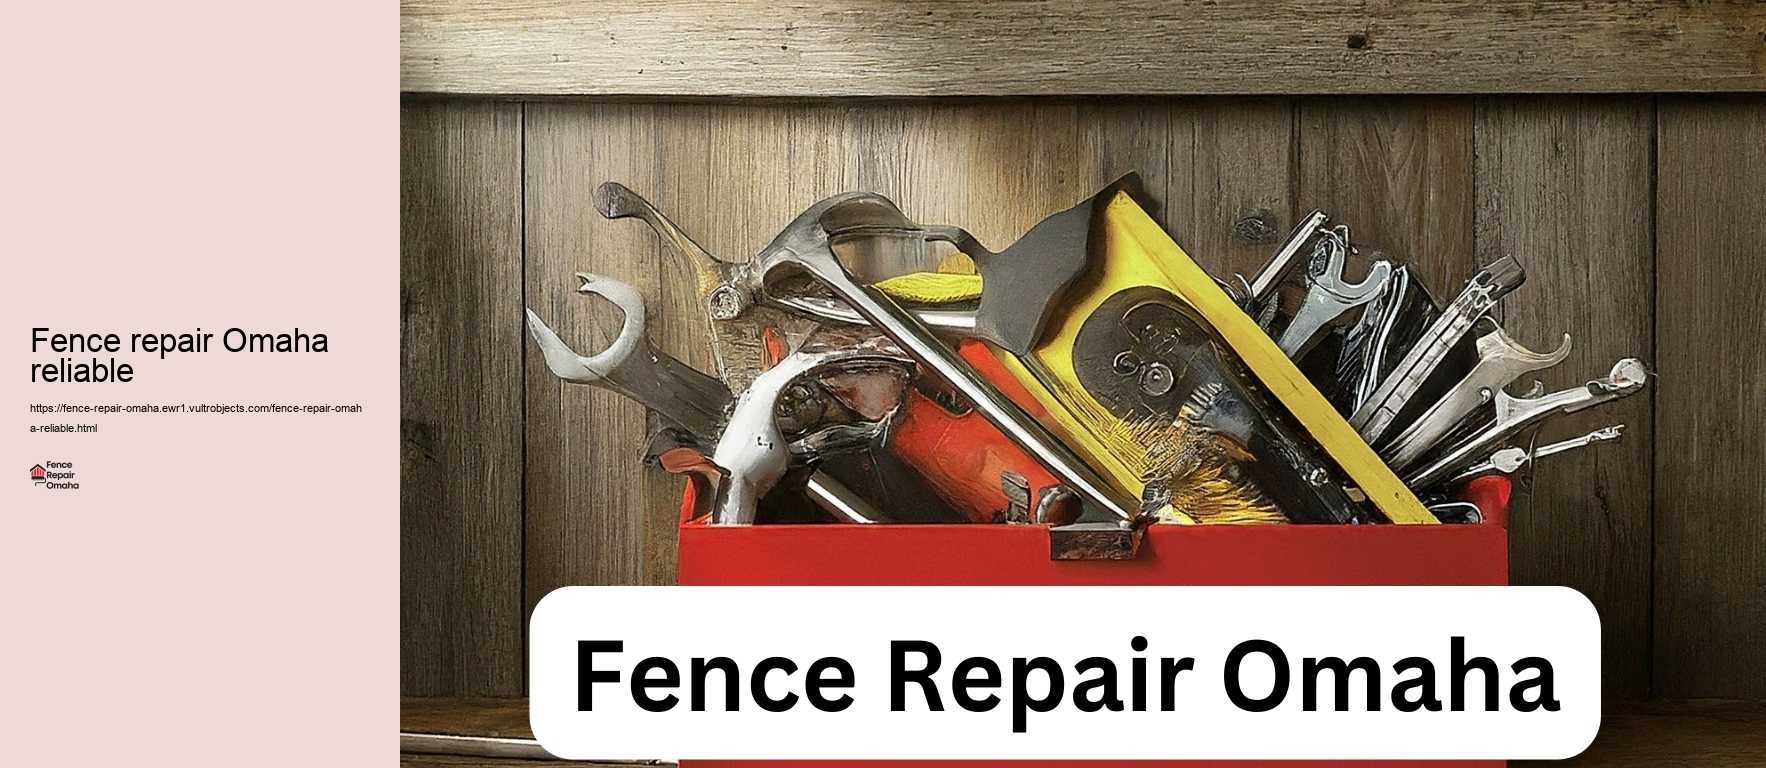 Fence repair Omaha reliable